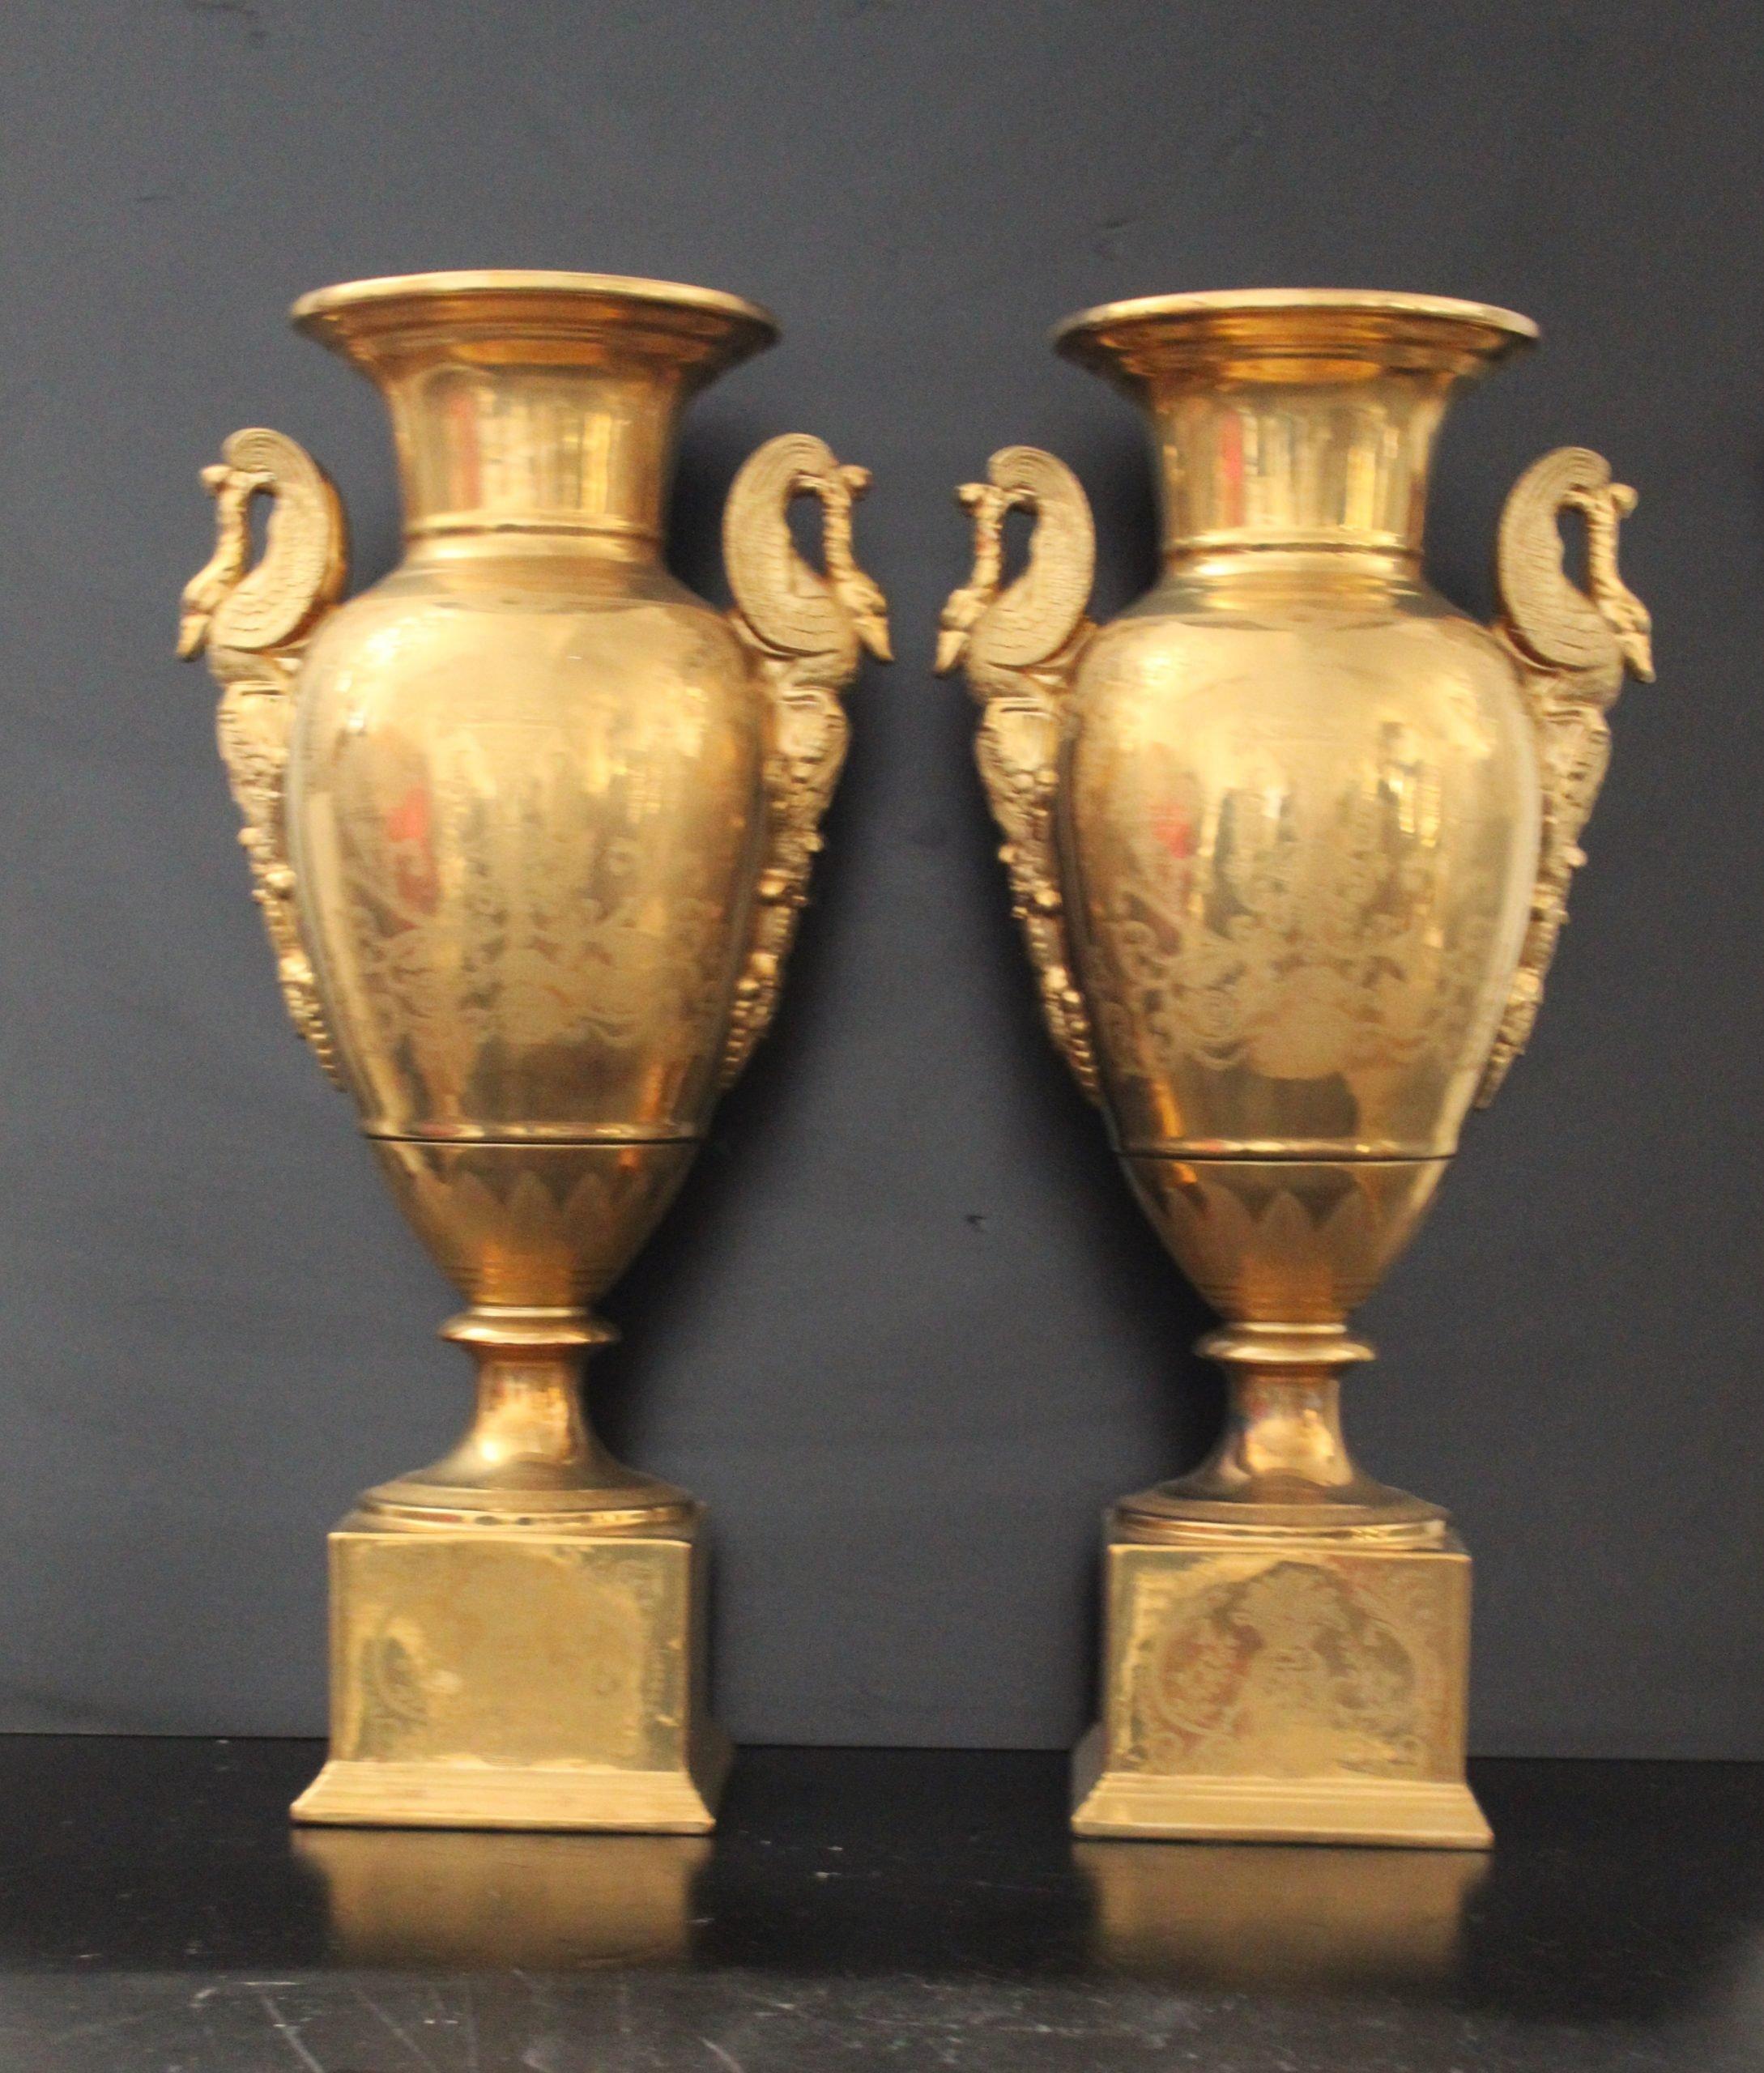 Large vases in gilded and painted porcelain with handles with sphinxes. Good condition.
 